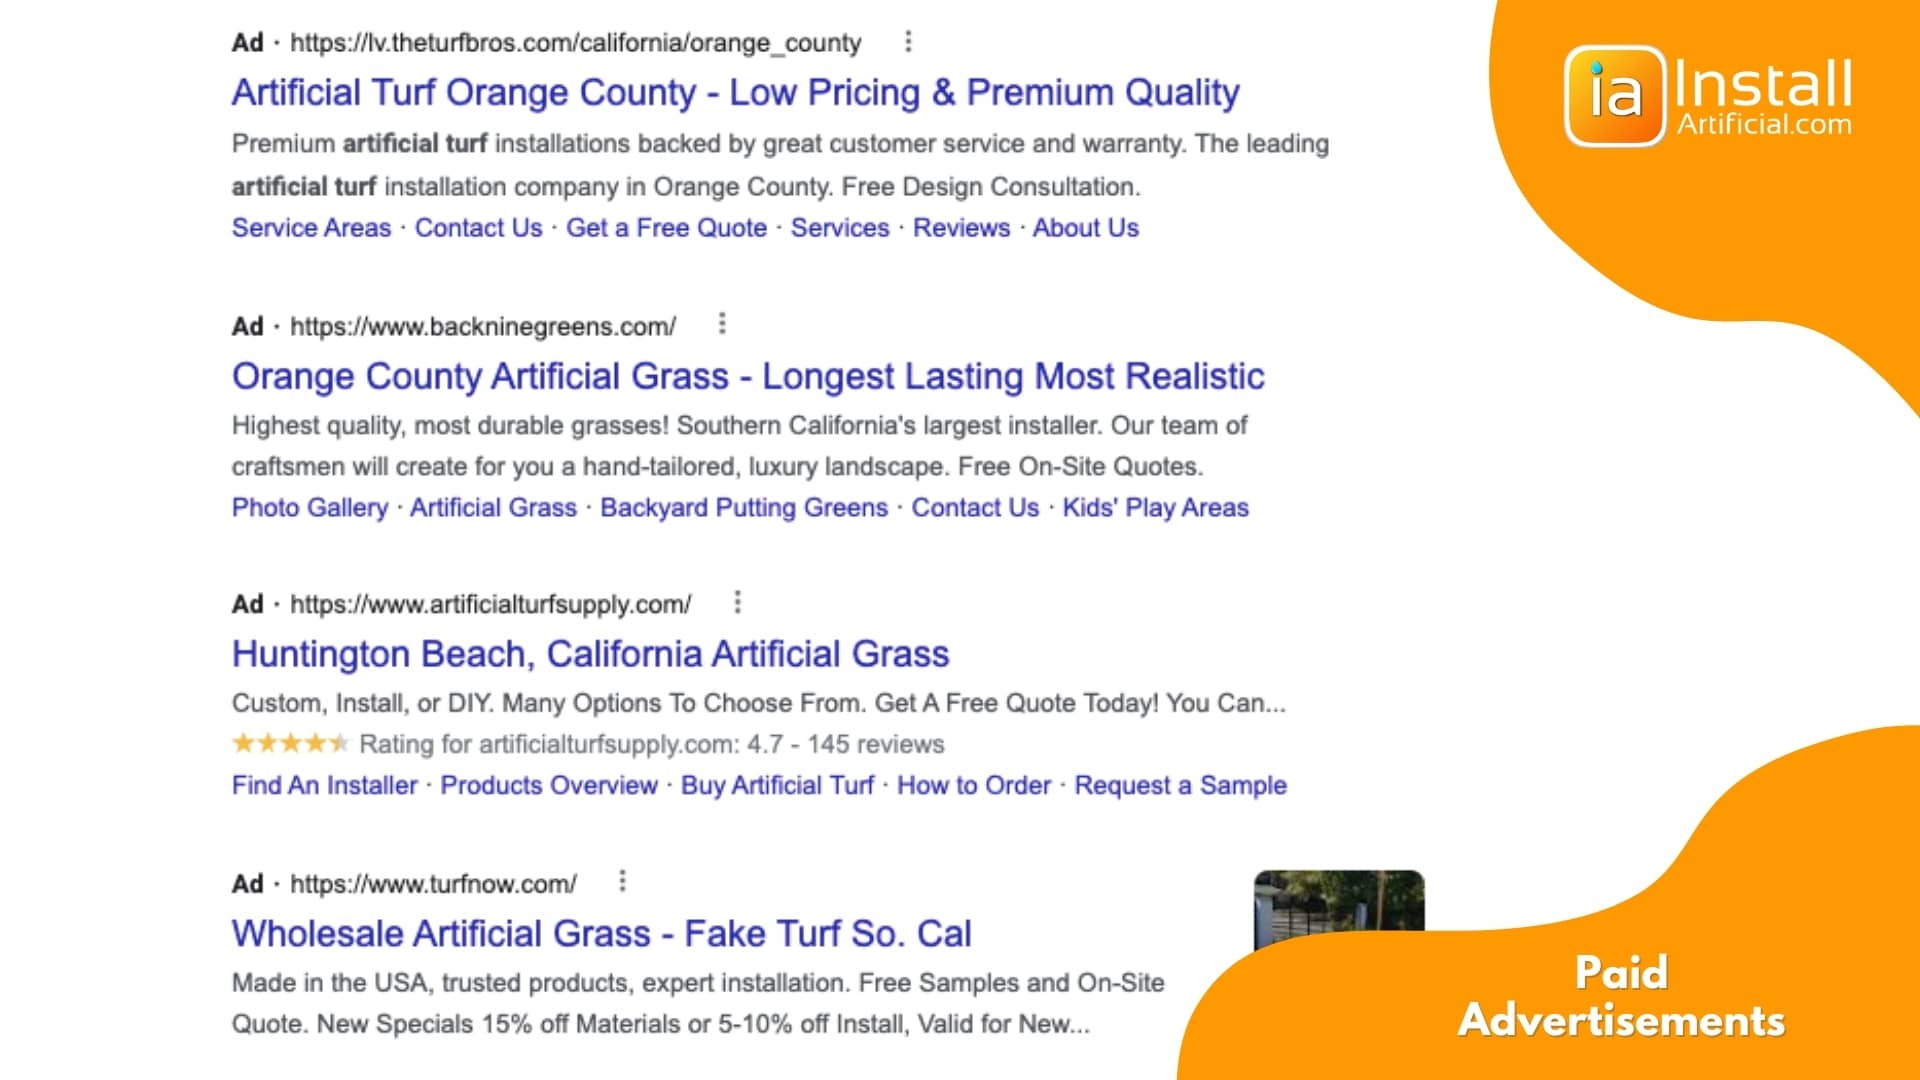 Avoid ads when looking for artificial turf stores near me